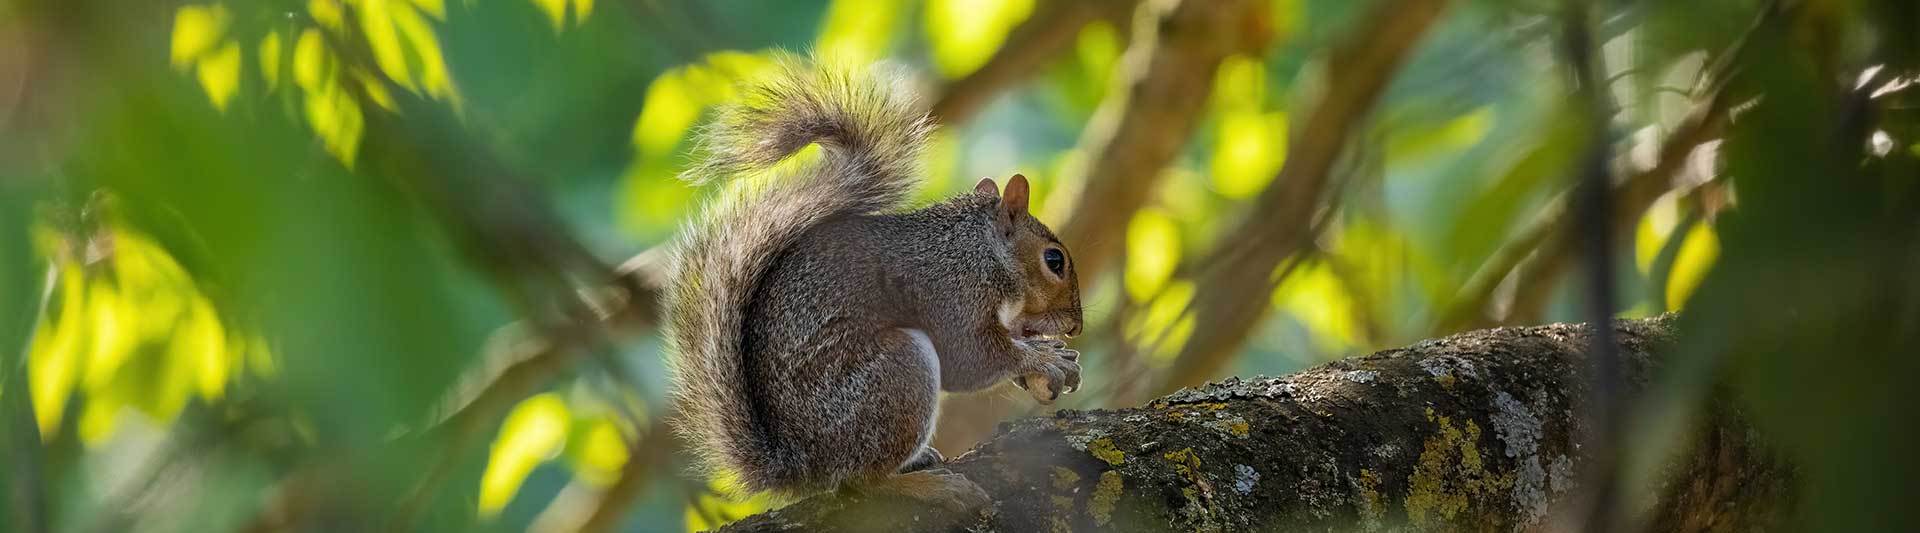 19 Interesting and Fun Squirrel Facts you Probably Didn't Know